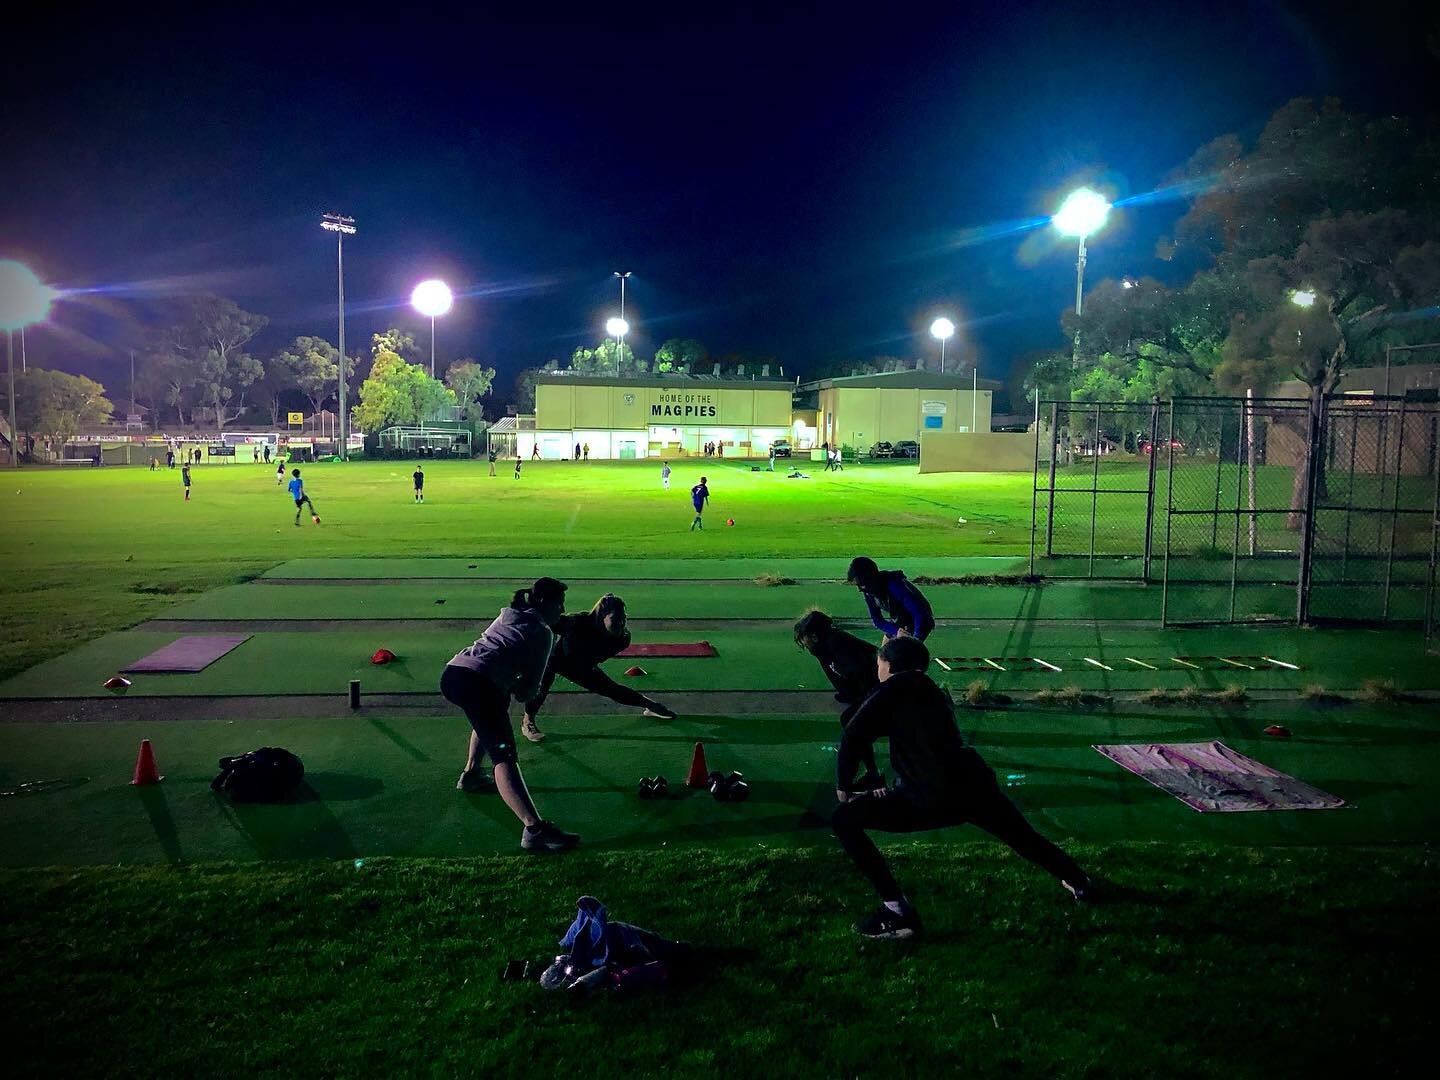 Under the lights, we TRAIN! 💯💪🏽🔥
&bull;
&bull;
&bull;
&bull;
#BBY #builtbyyou #coaching #workout #fitness #exercise #shire #healthylifestyle #lifestyle #training #movement #health #fatloss #personaltraining #pt #ep #motivation #sydney #outdoortra